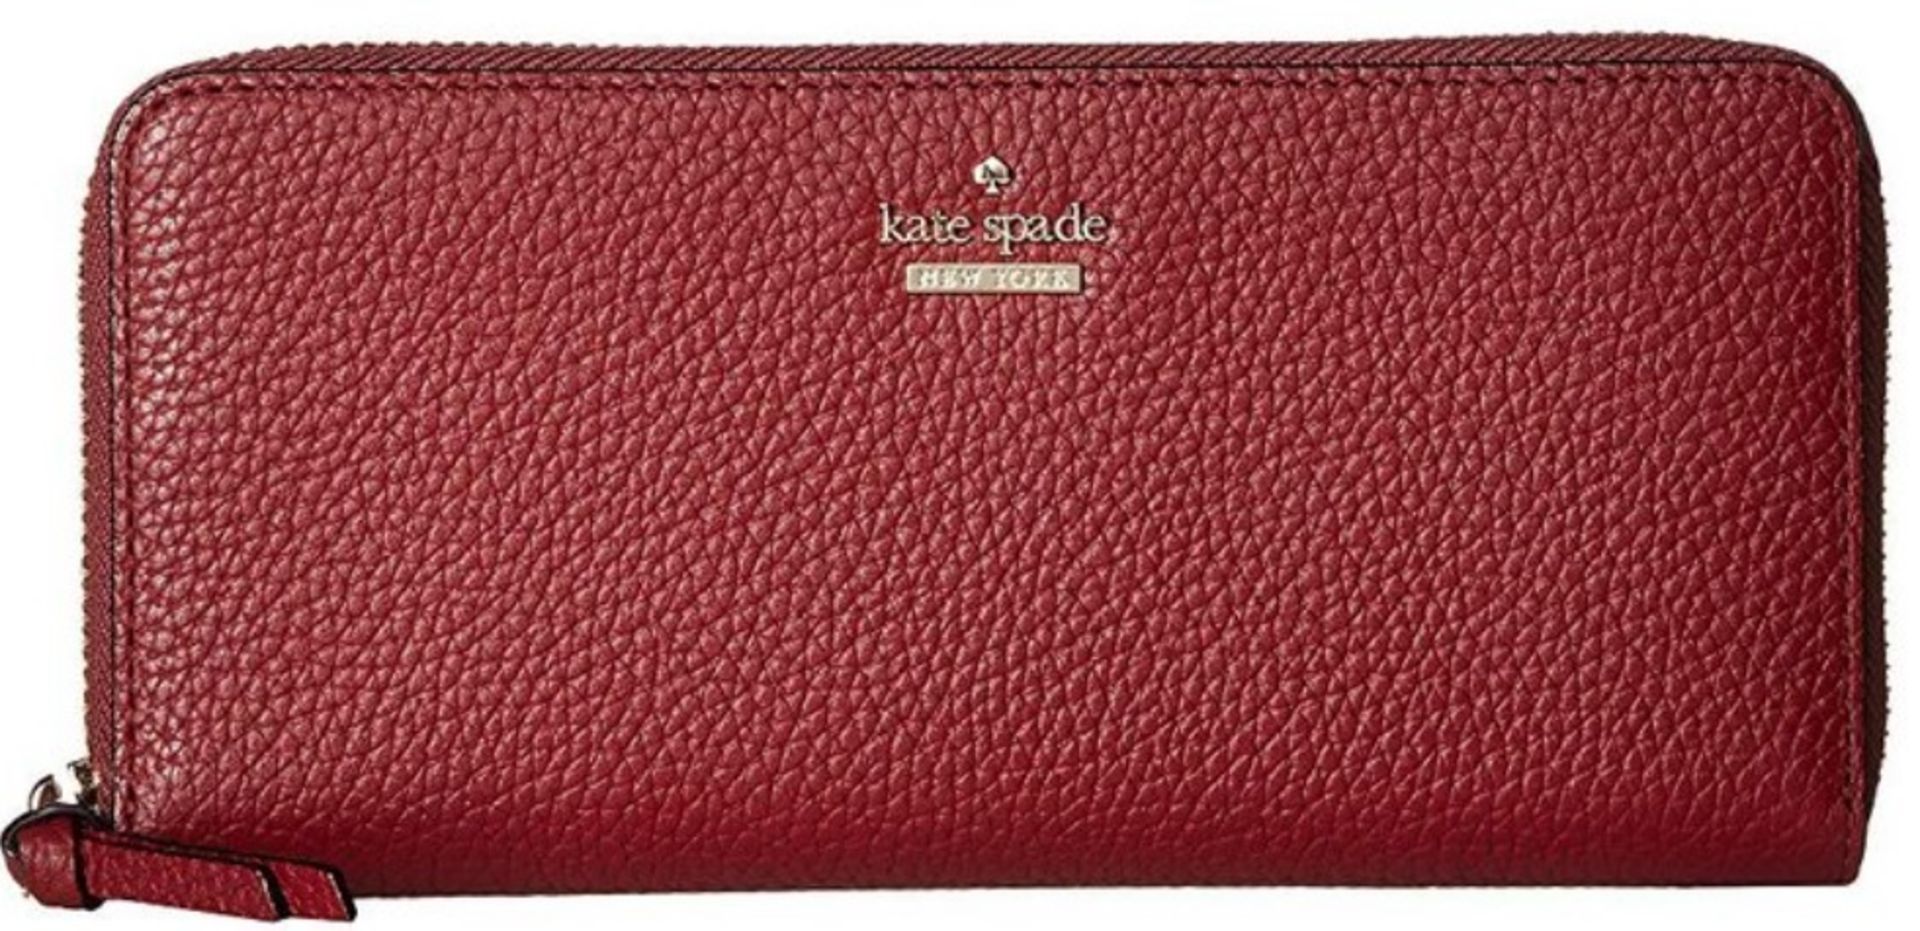 Kate Spade New York Women's Jackson Street Lindsey Leather Wallet - Red RRP £171